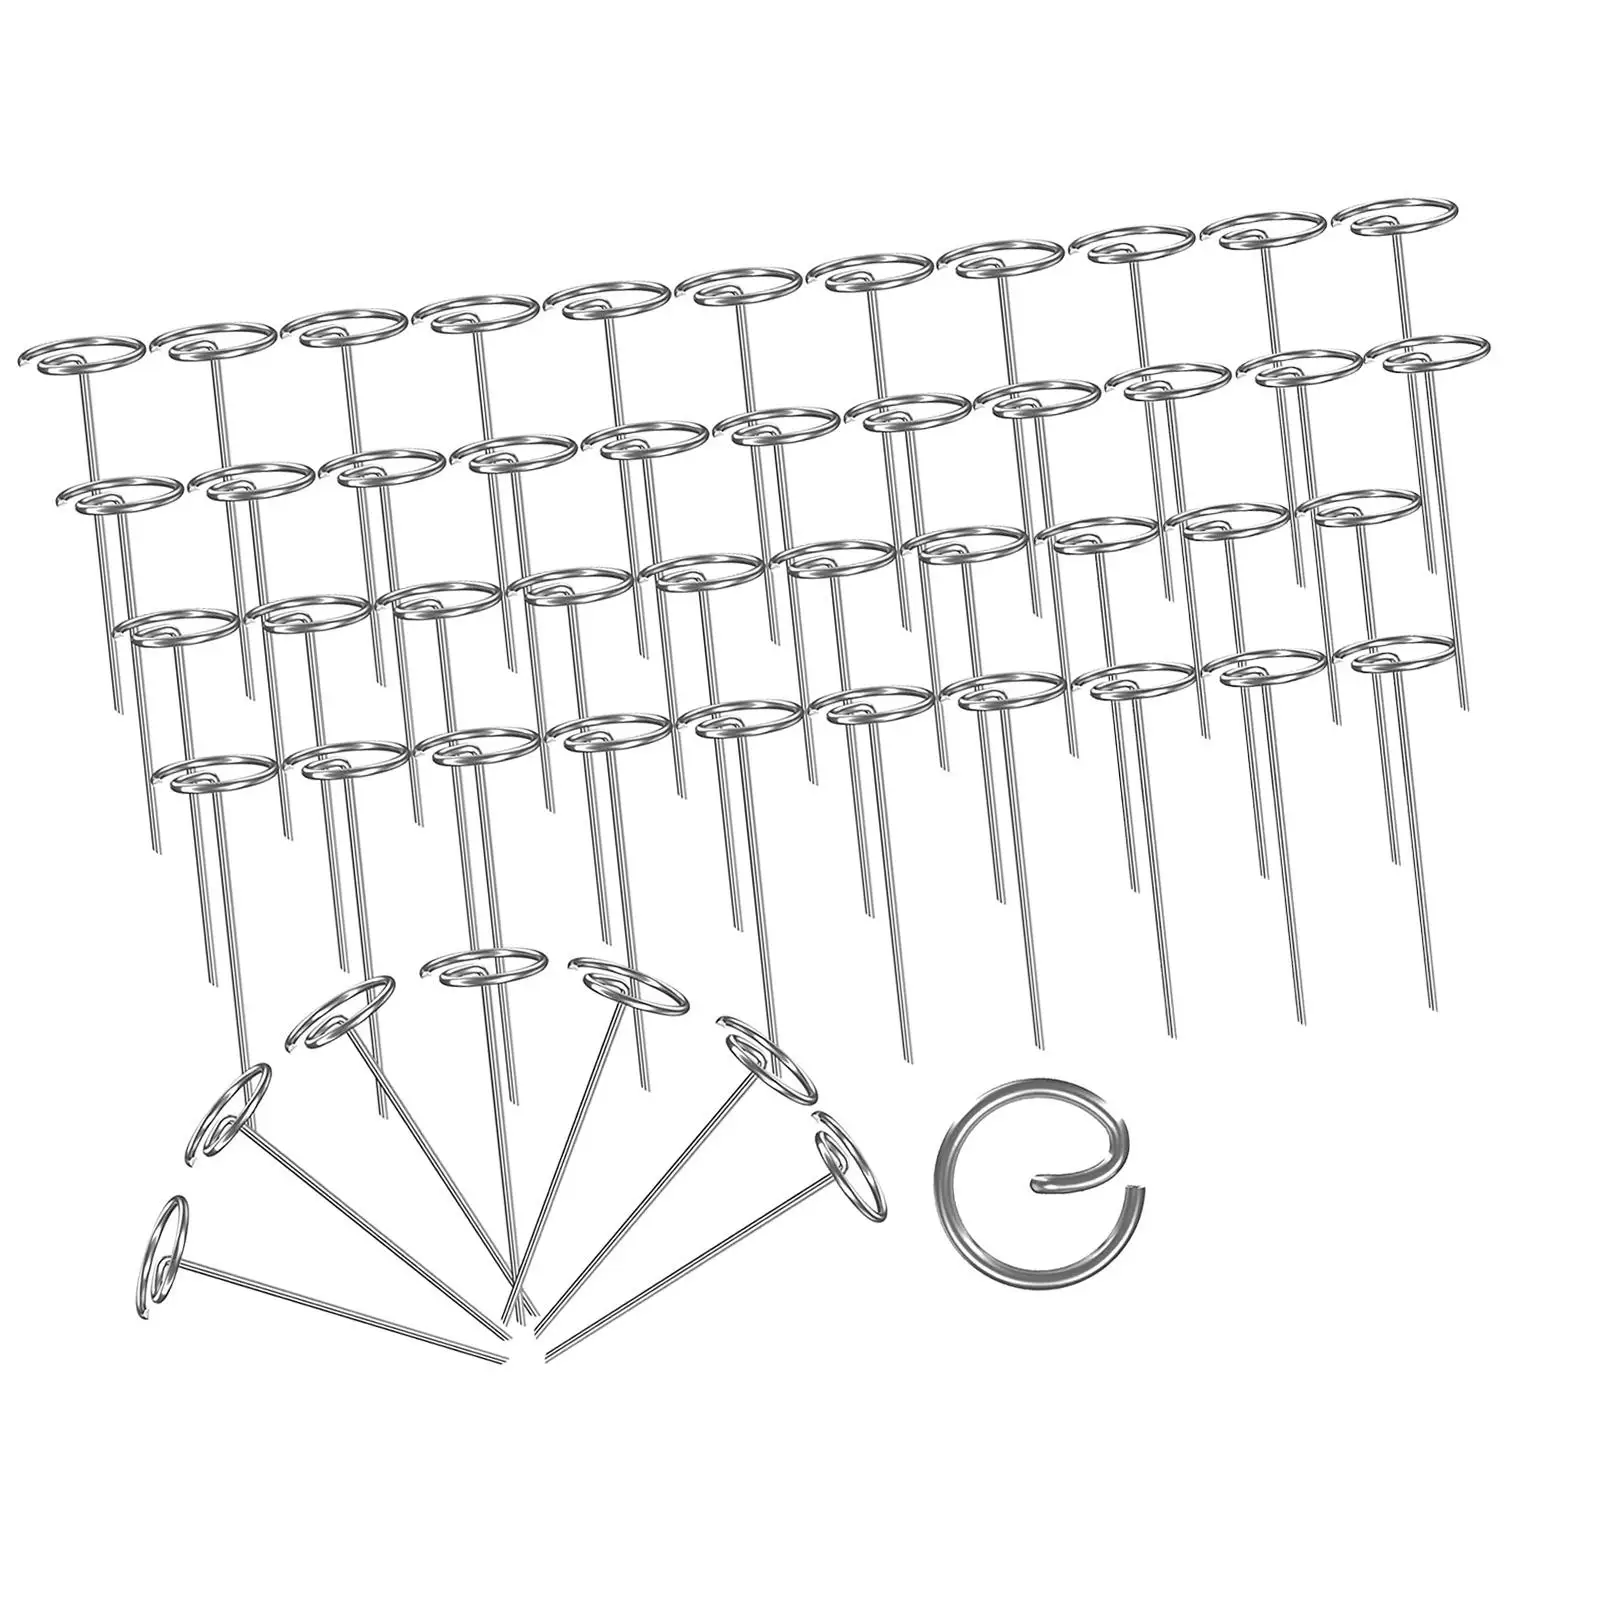 50Pcs Galvanized Steel Circle Top Pins Barrier Pins Landscape Pins Sod Staples for Landscaping Barrier Garden Yard Fabric